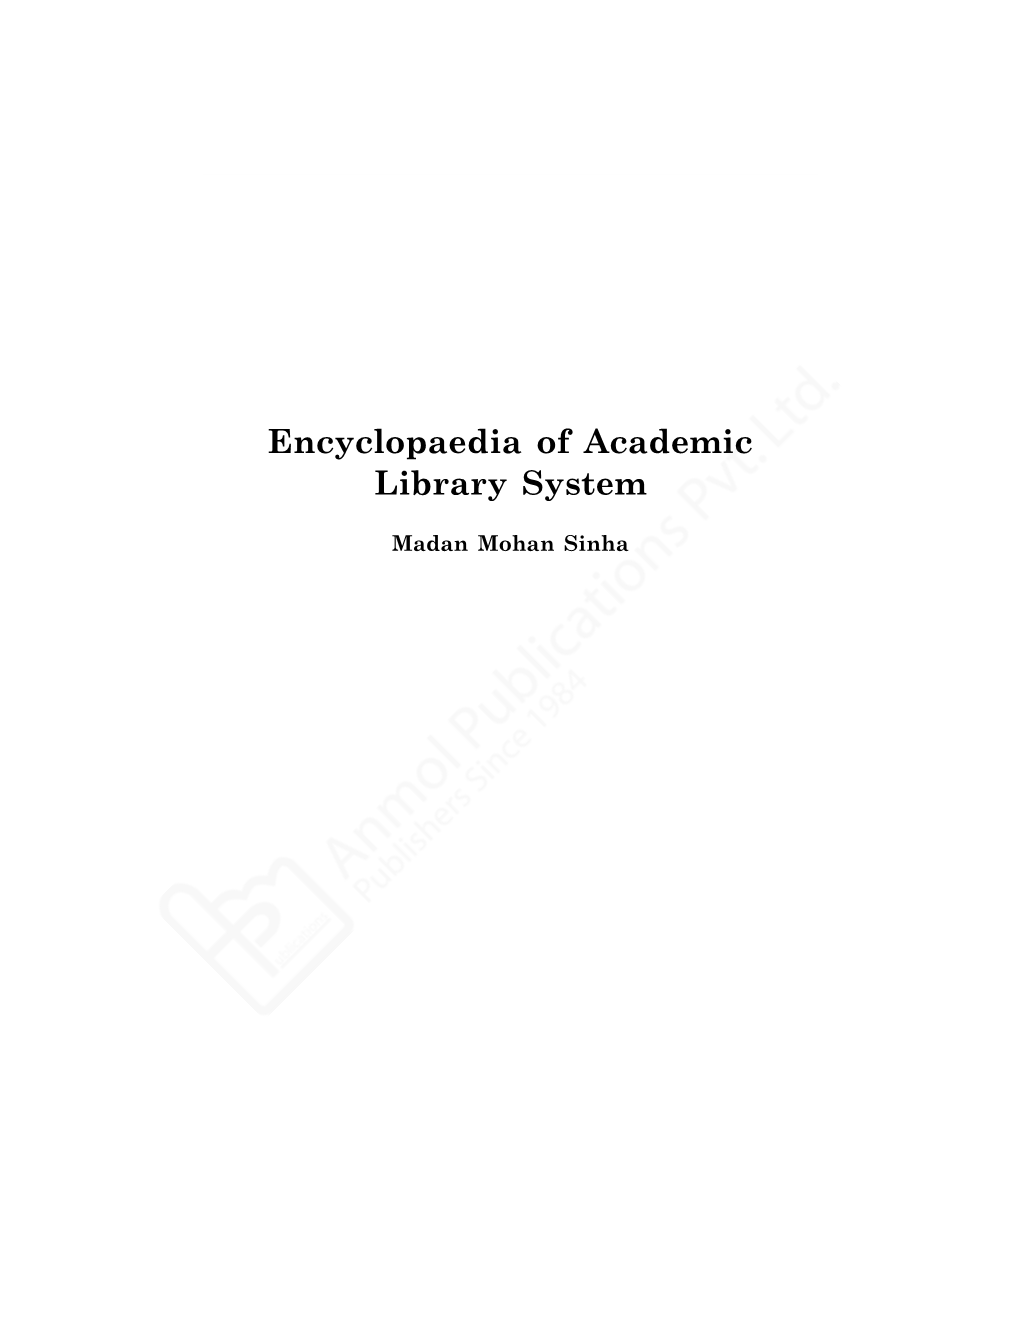 Encyclopaedia of Academic Library System 297